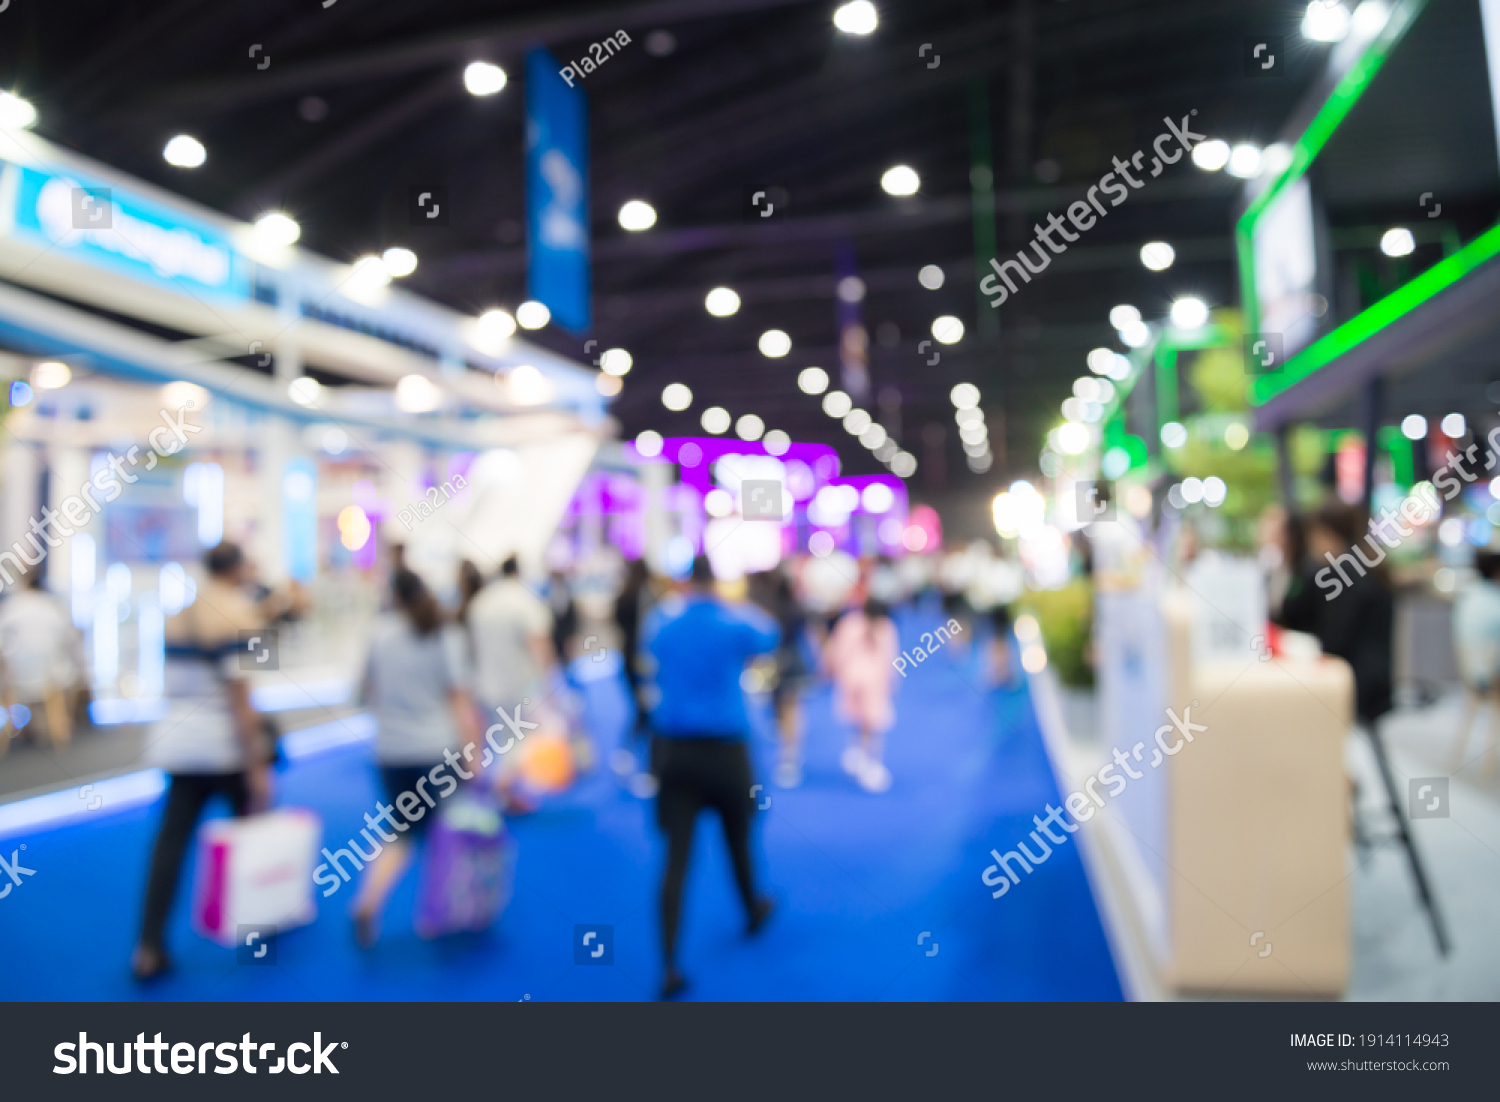 Abstract blur people in exhibition hall event trade show expo background. Large international exhibition, convention center, business marketing and event fair organizer concept. #1914114943